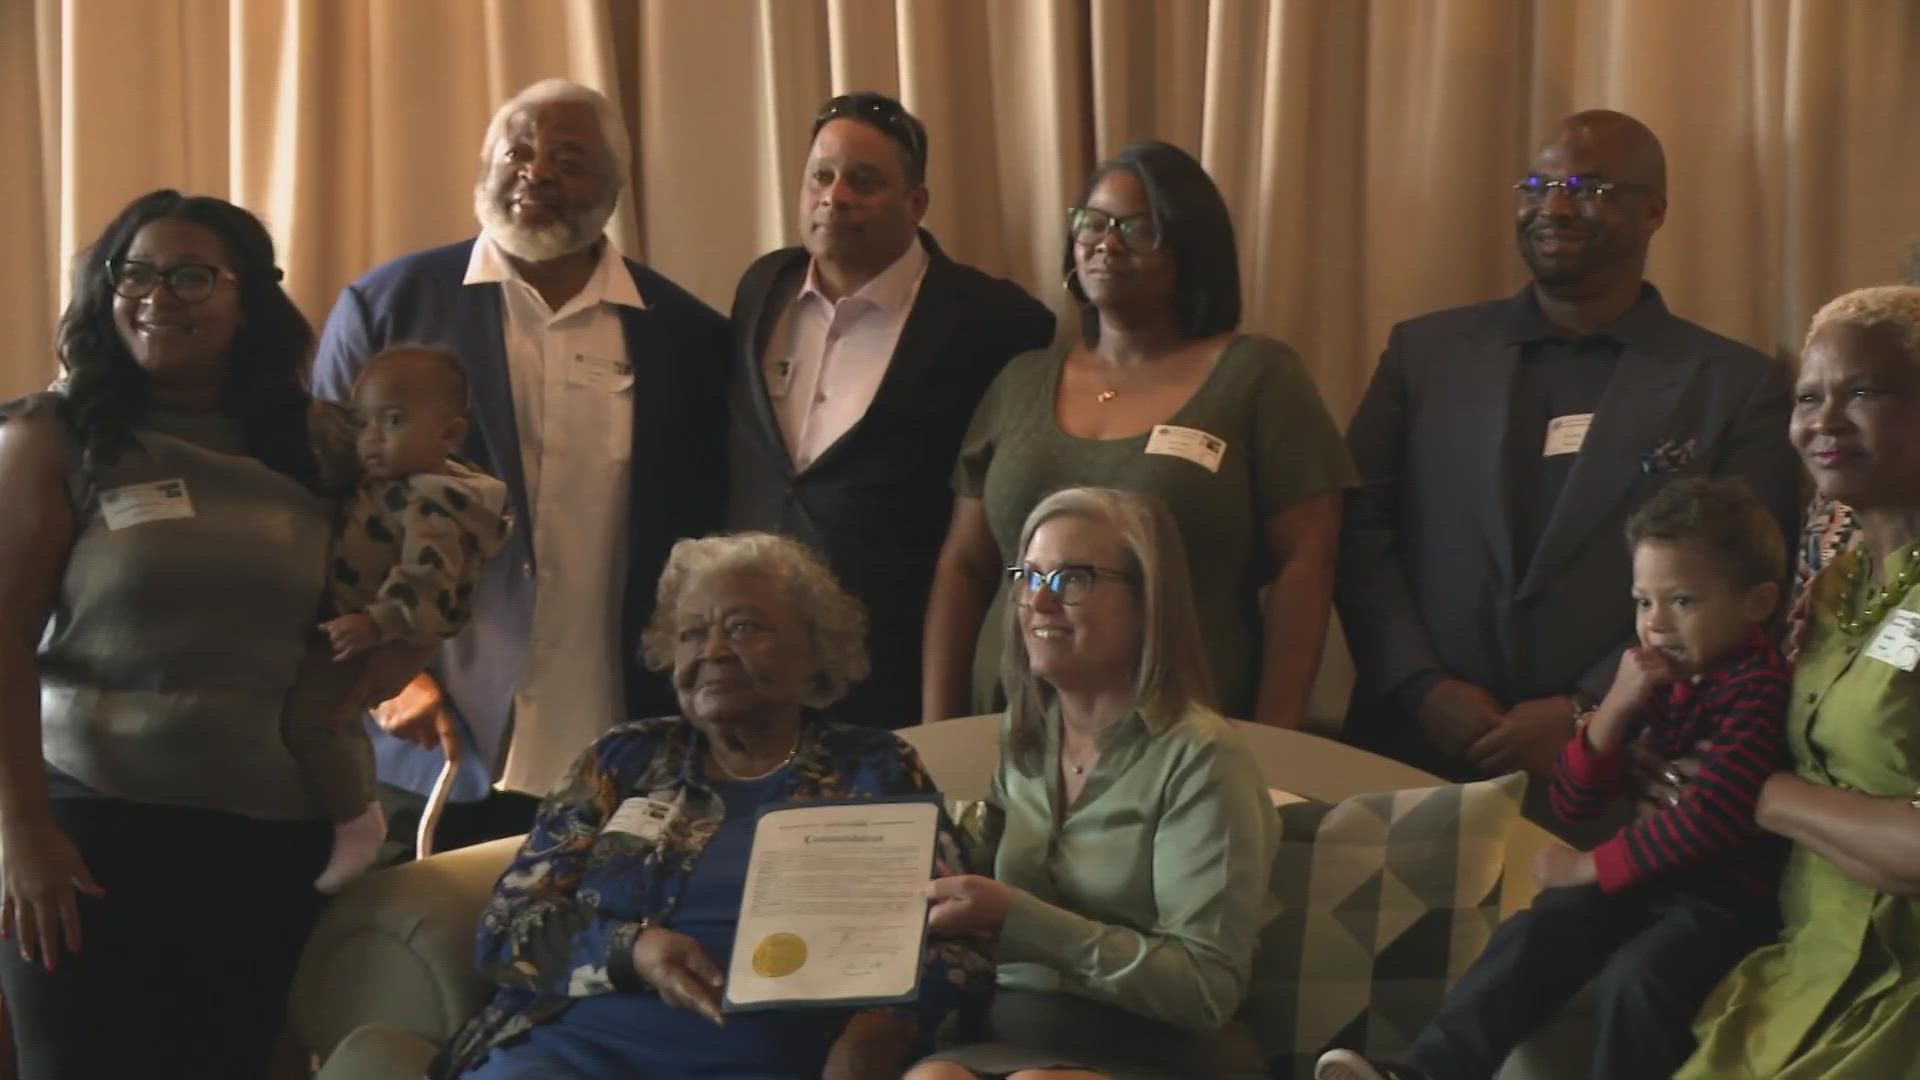 Mrs. White received a commendation from Gov. Katie Hobbs on Tuesday. She recently turned 100 years old.